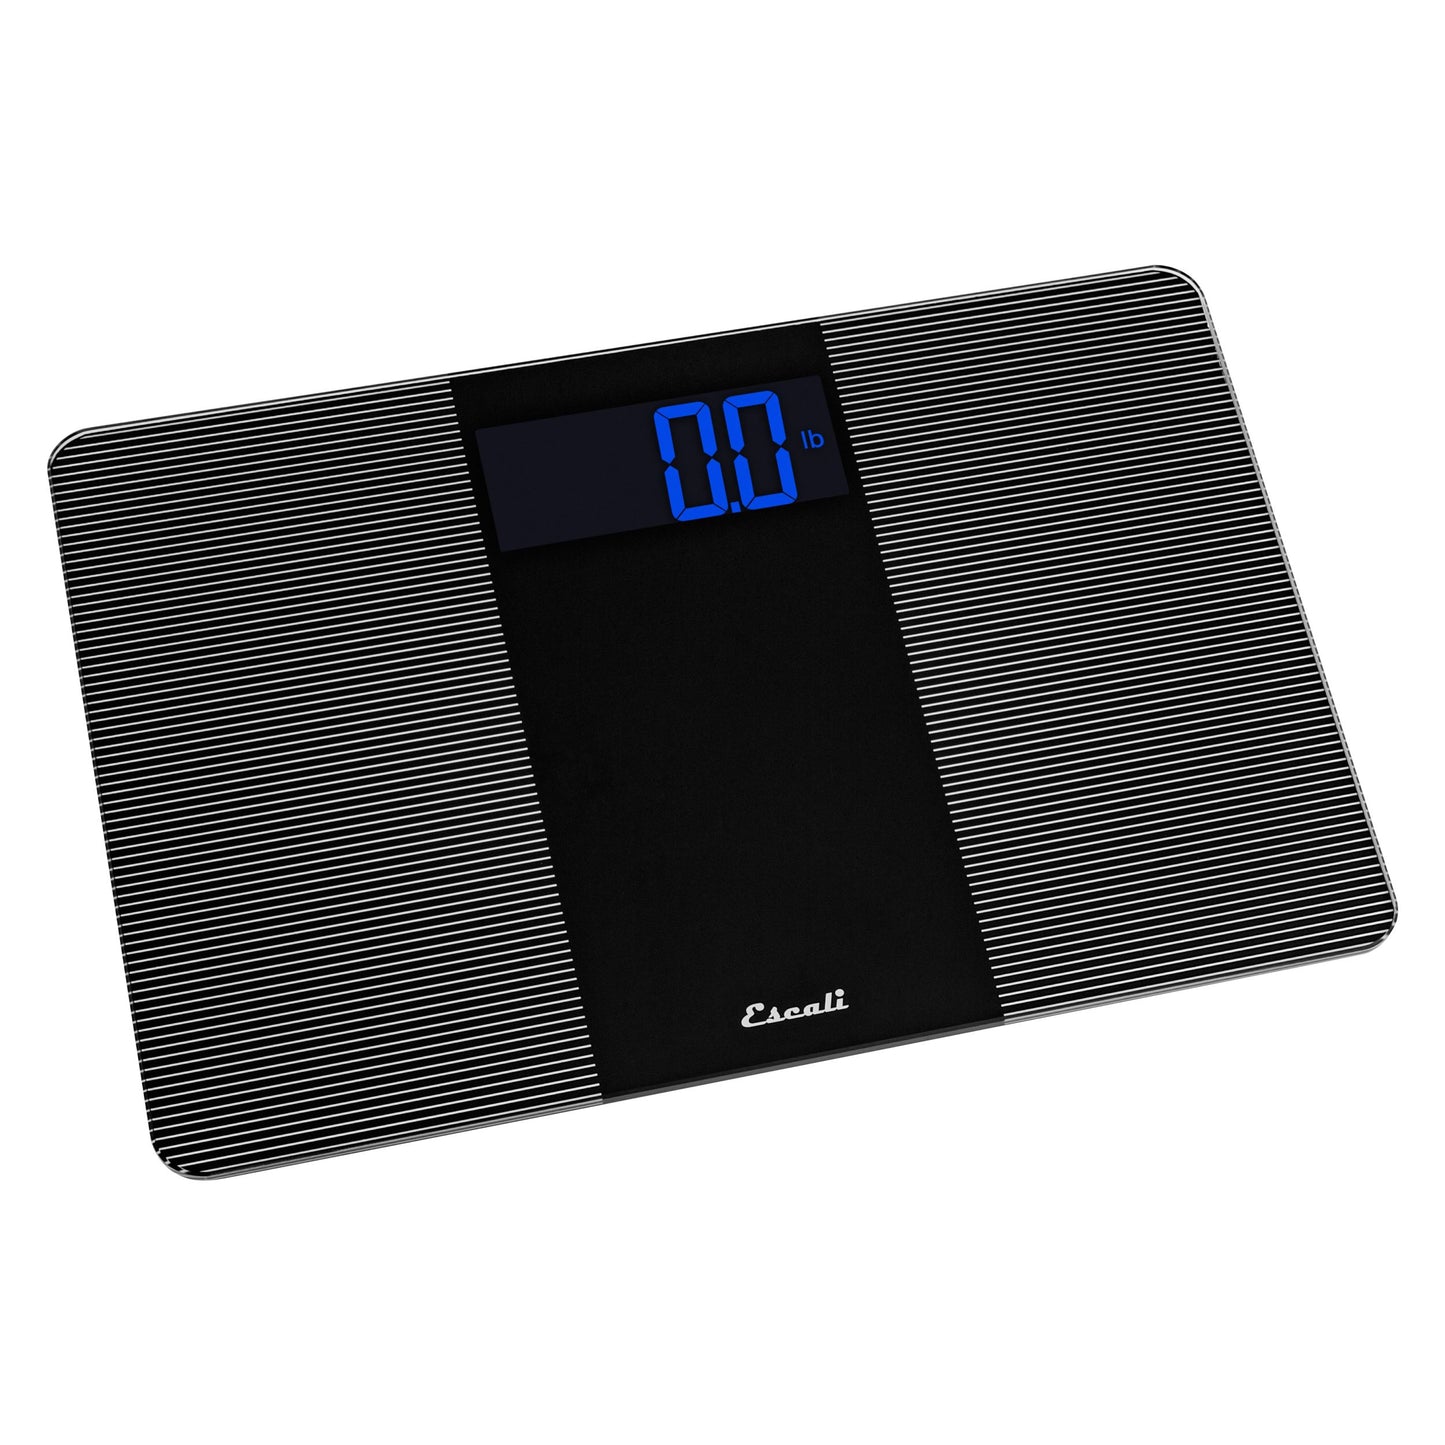 Extra Wide Bathroom Scale